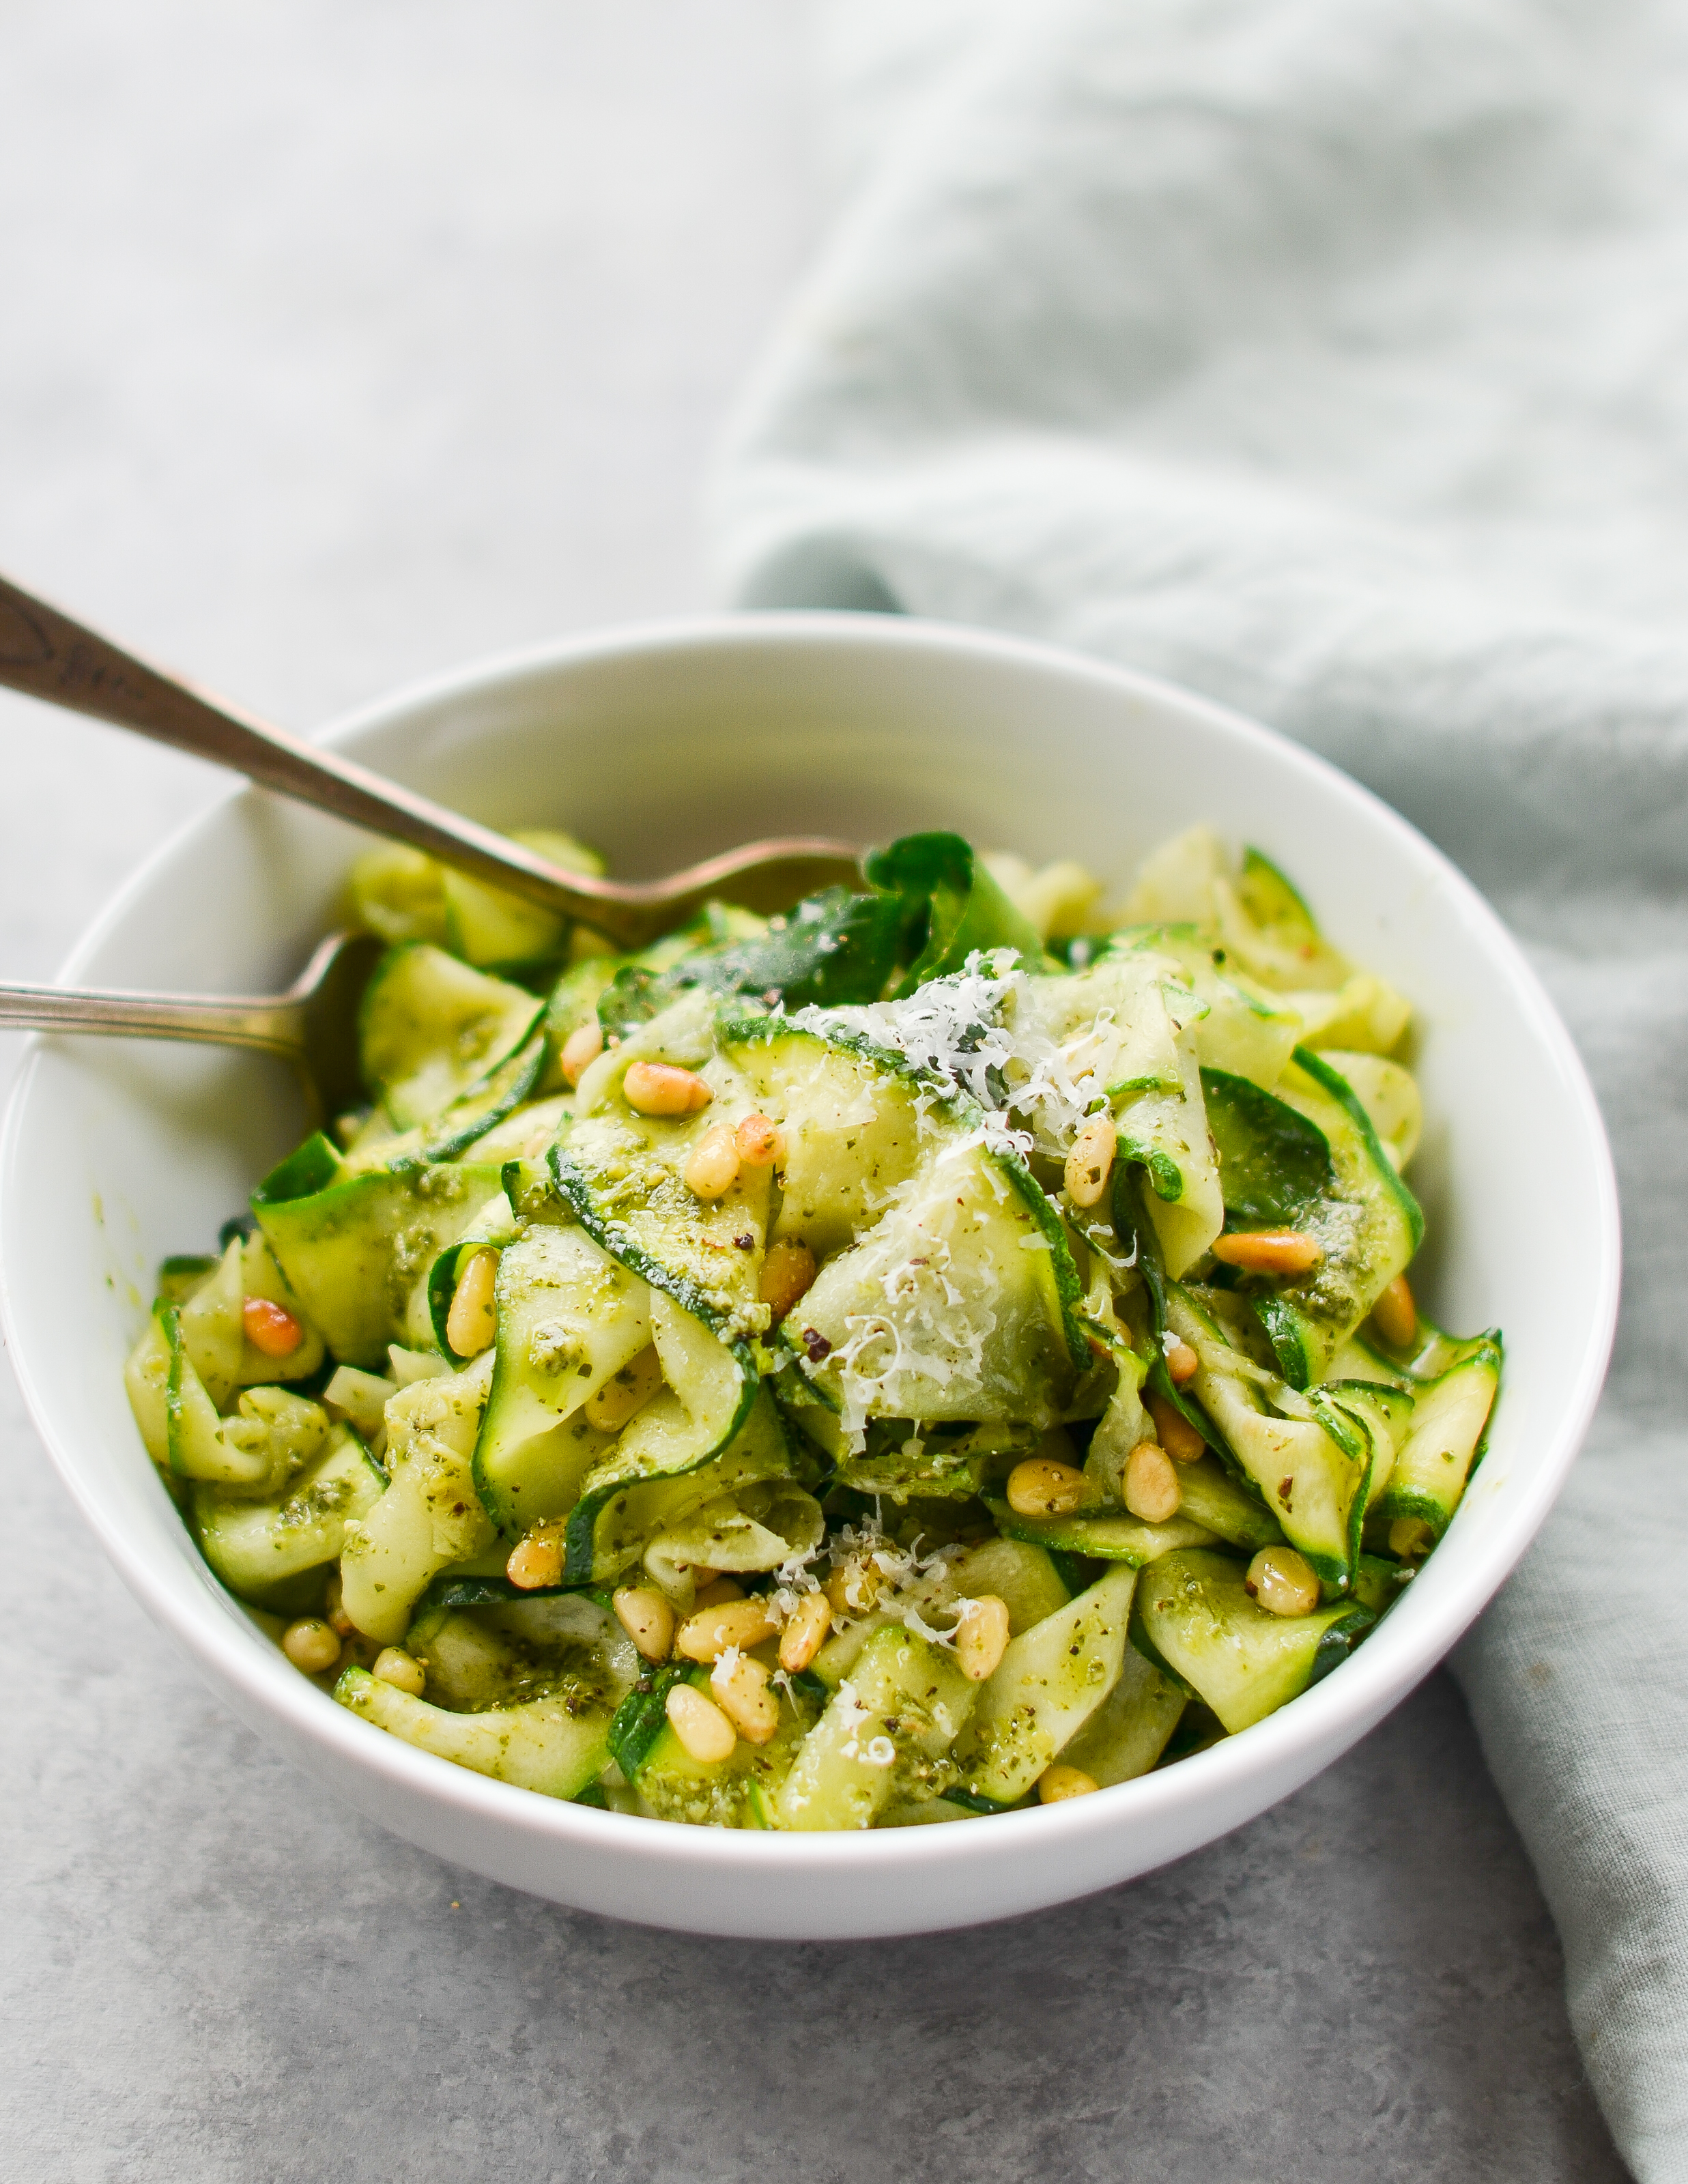 How to Make the Perfect Zoodles (Zucchini Noodles) with Pesto